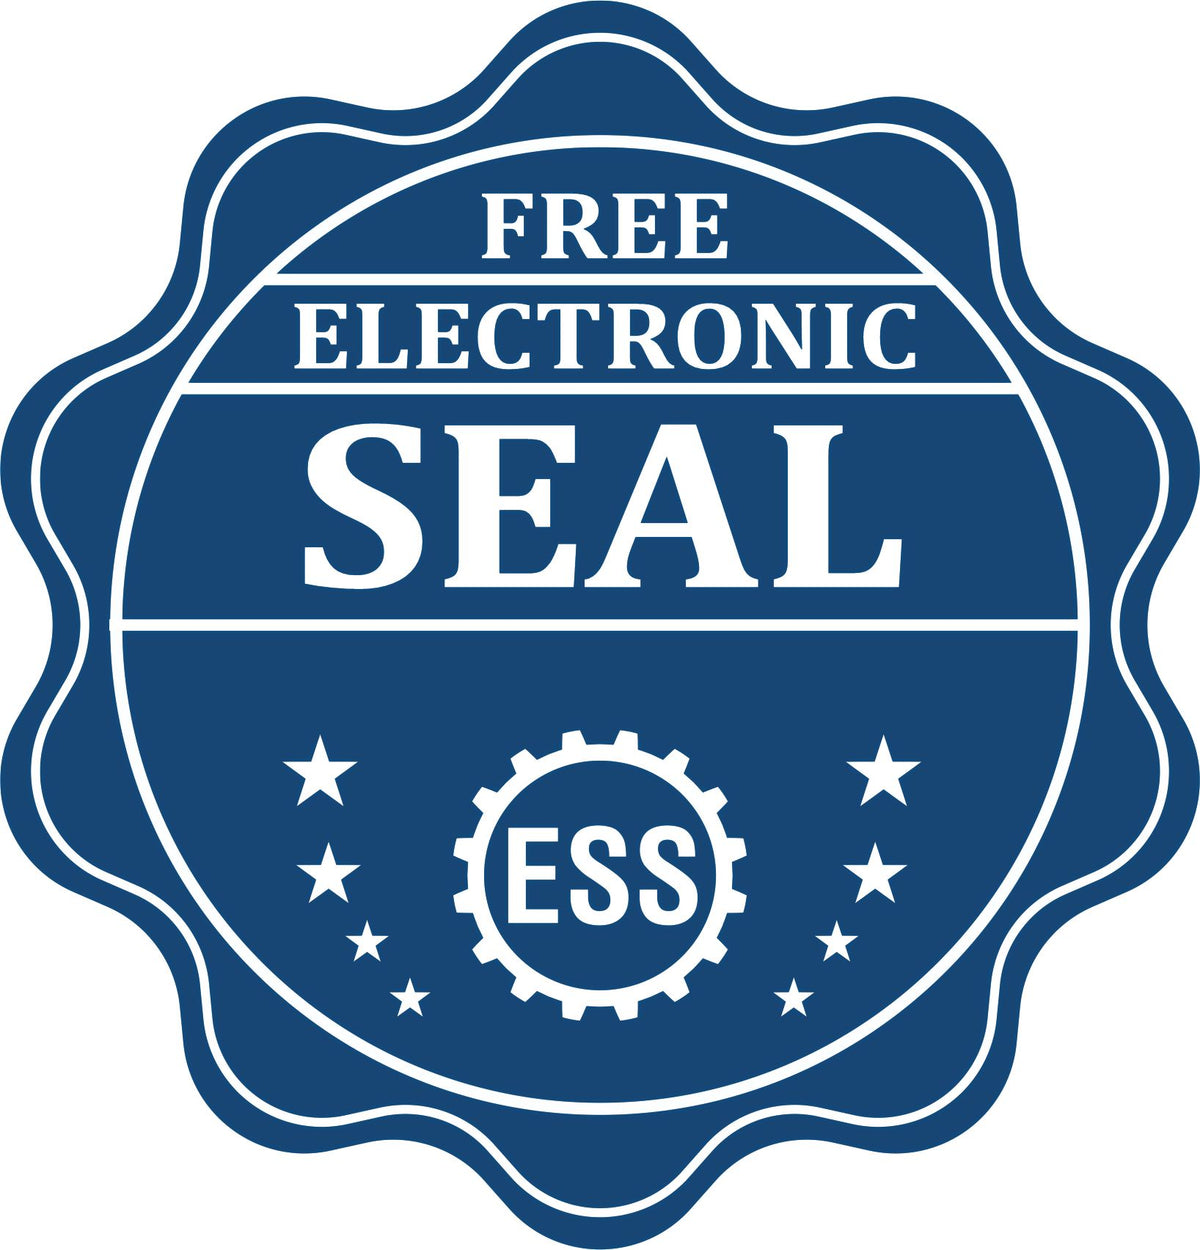 A badge showing a free electronic seal for the California Professional Engineer Seal Stamp with stars and the ESS gear on the emblem.